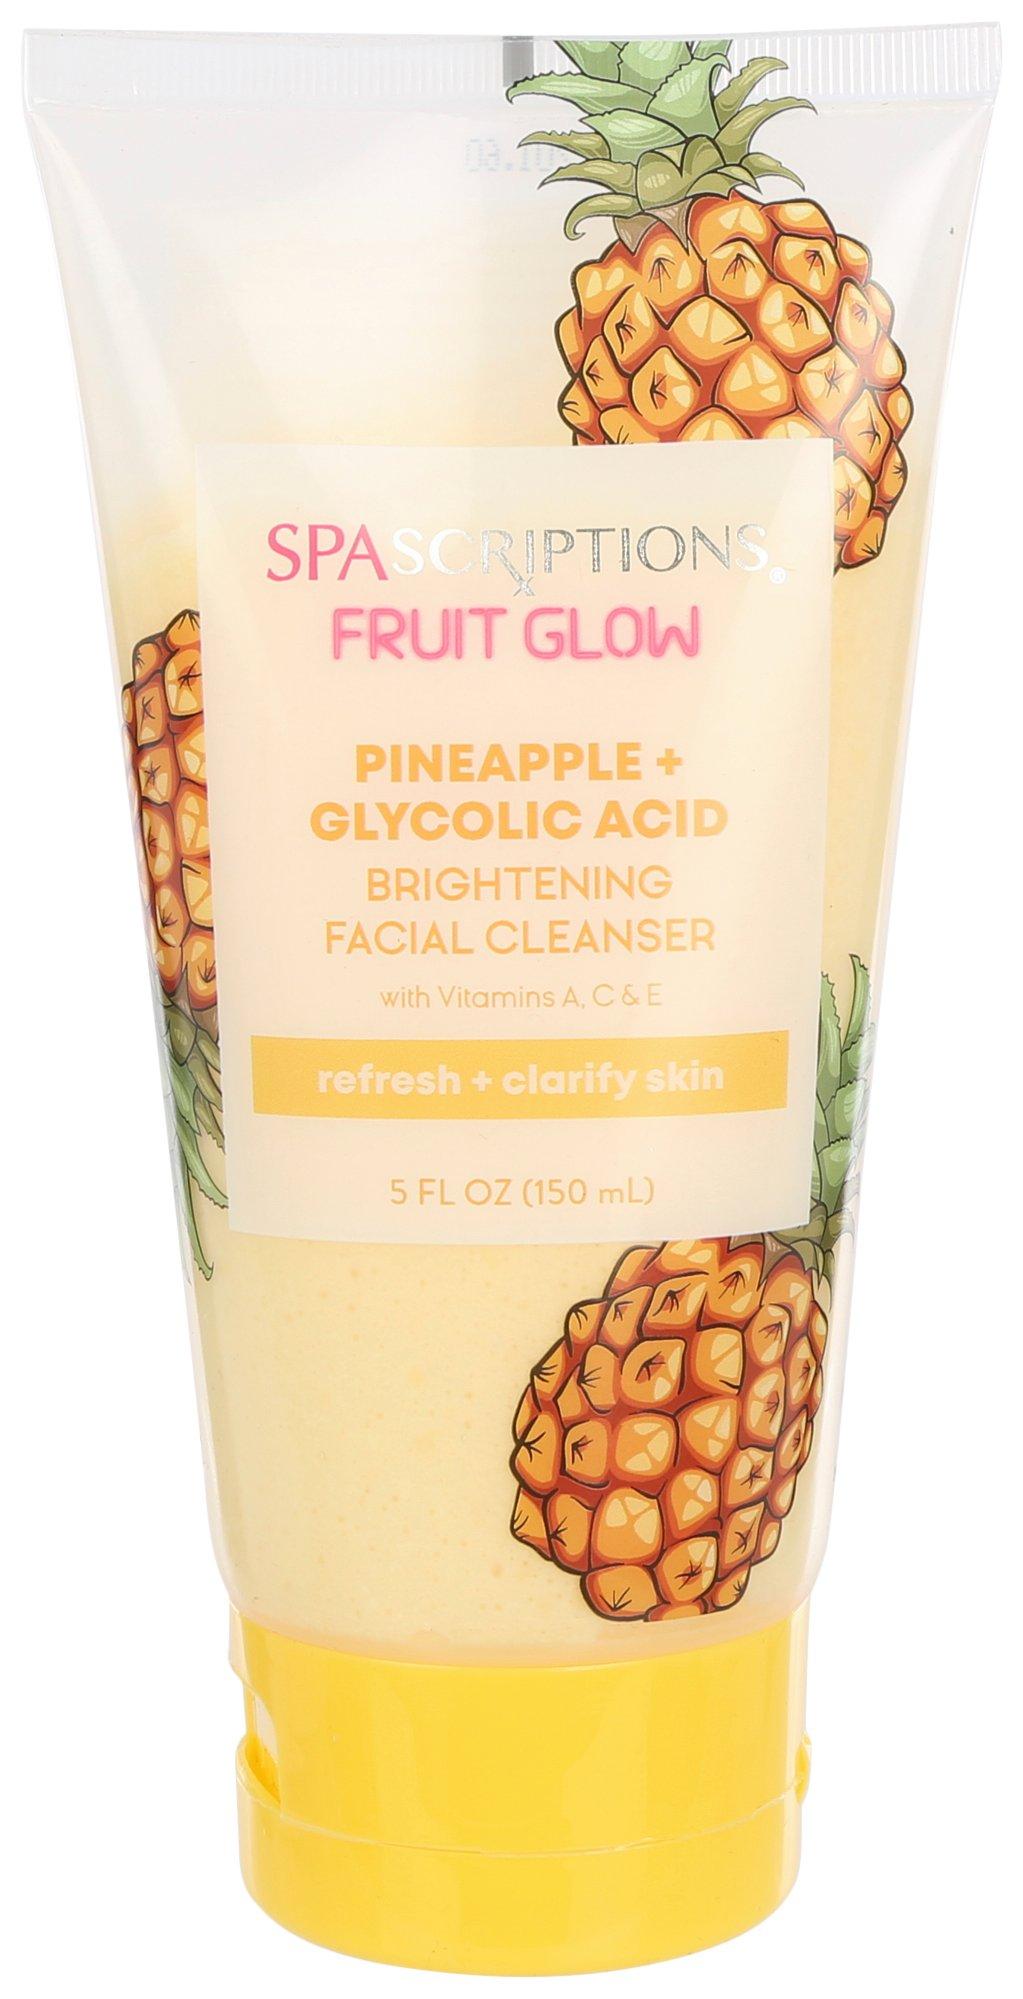 Spascriptions Fruit Glow Brightening Facial Cleanser